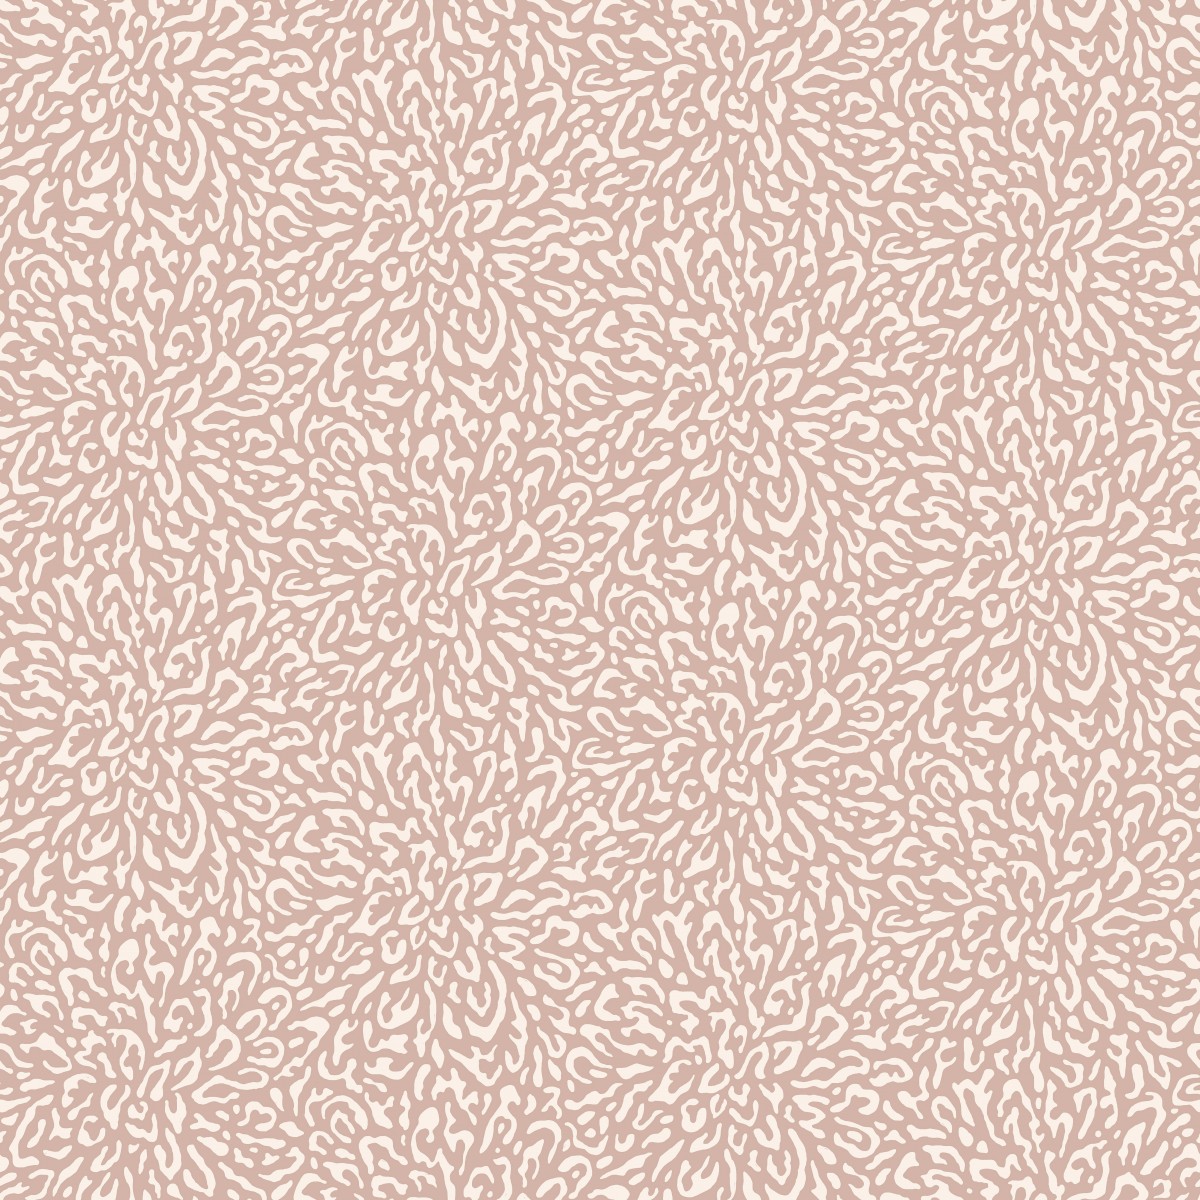 Tapet Corallo, Pink Stucco Luxury Patterned, 1838 Wallcoverings, 5.3mp / rola, Tapet living 